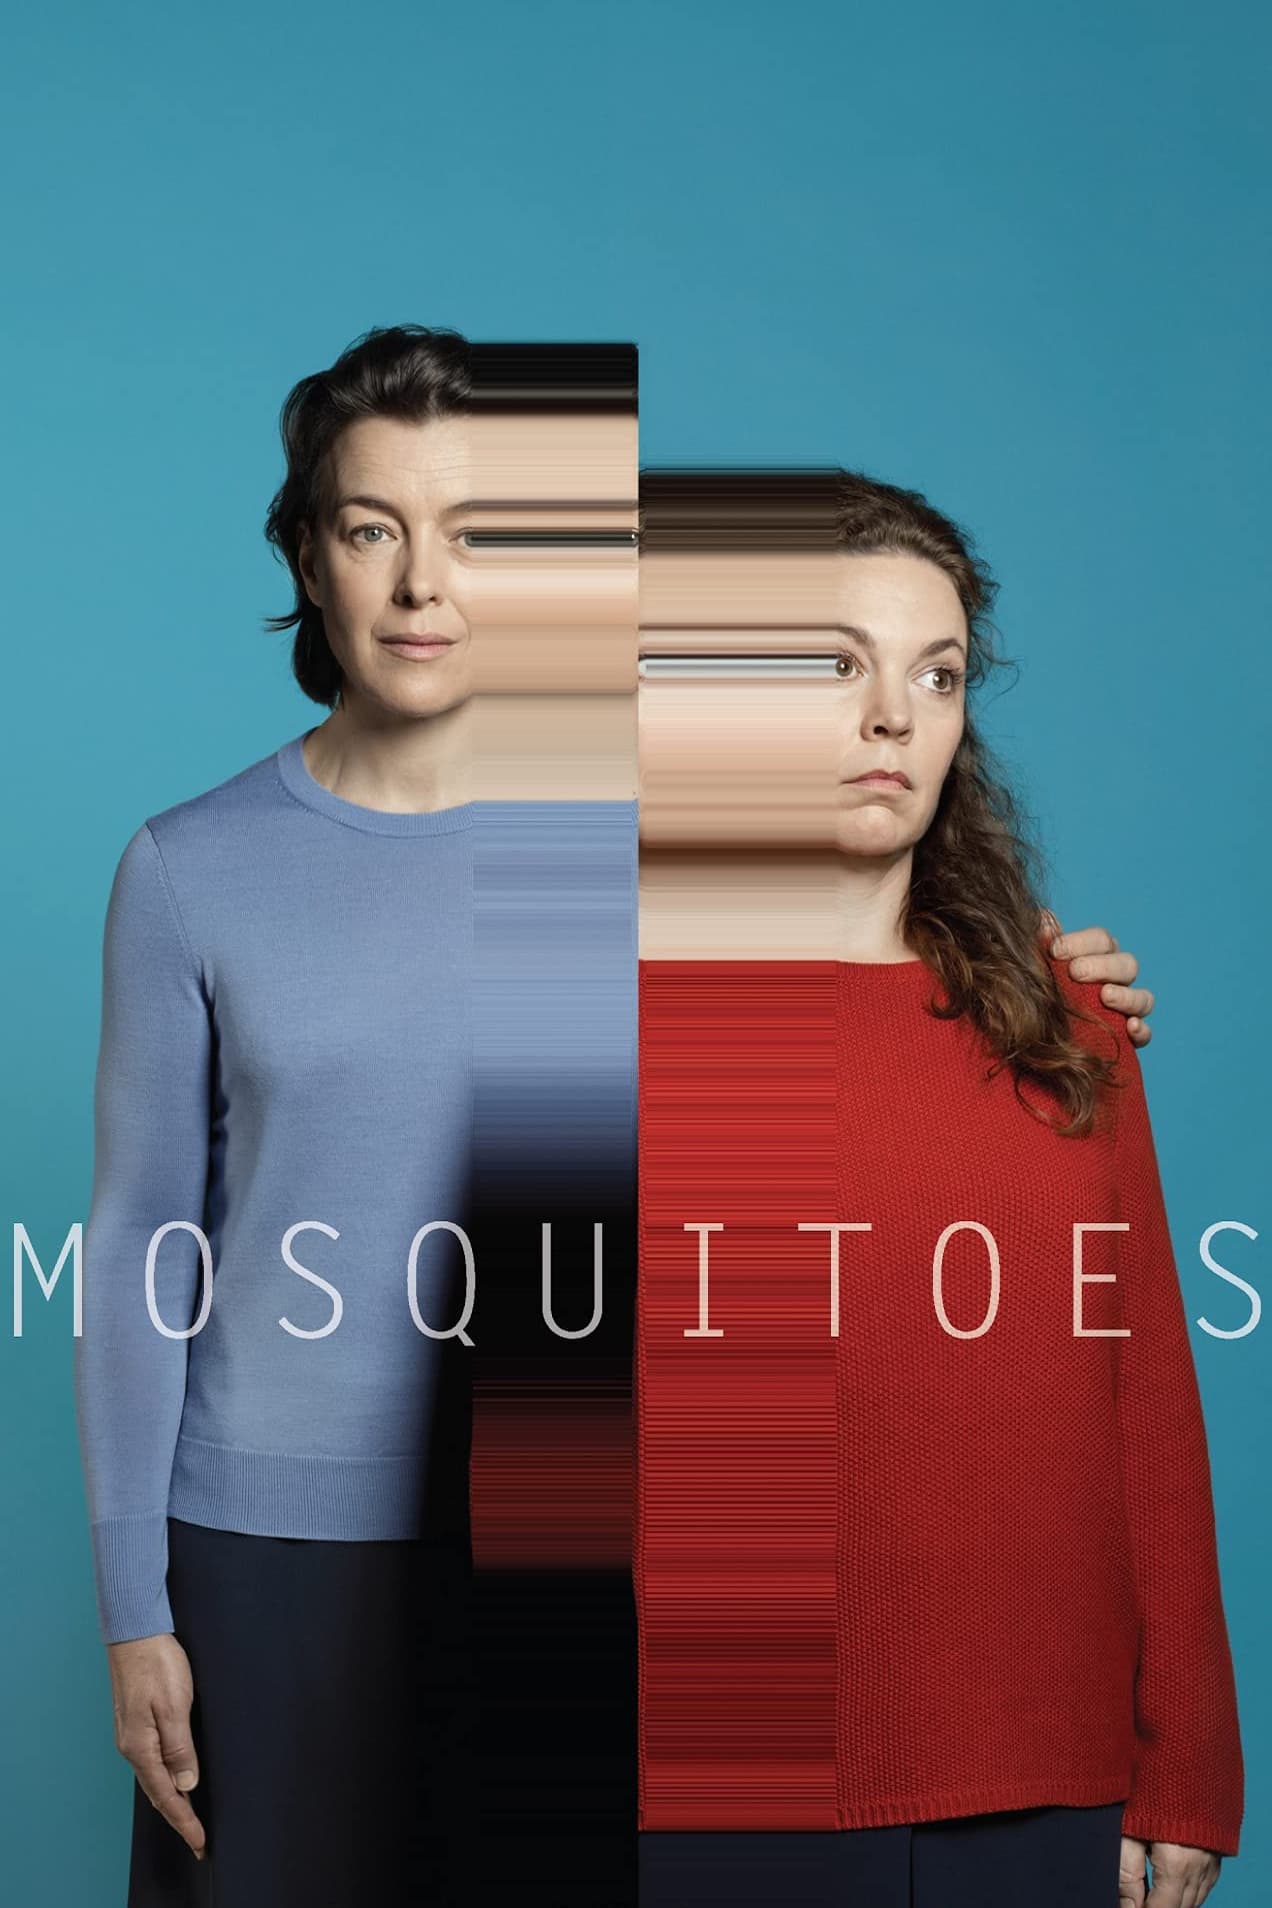 National Theatre Live: Mosquitoes film